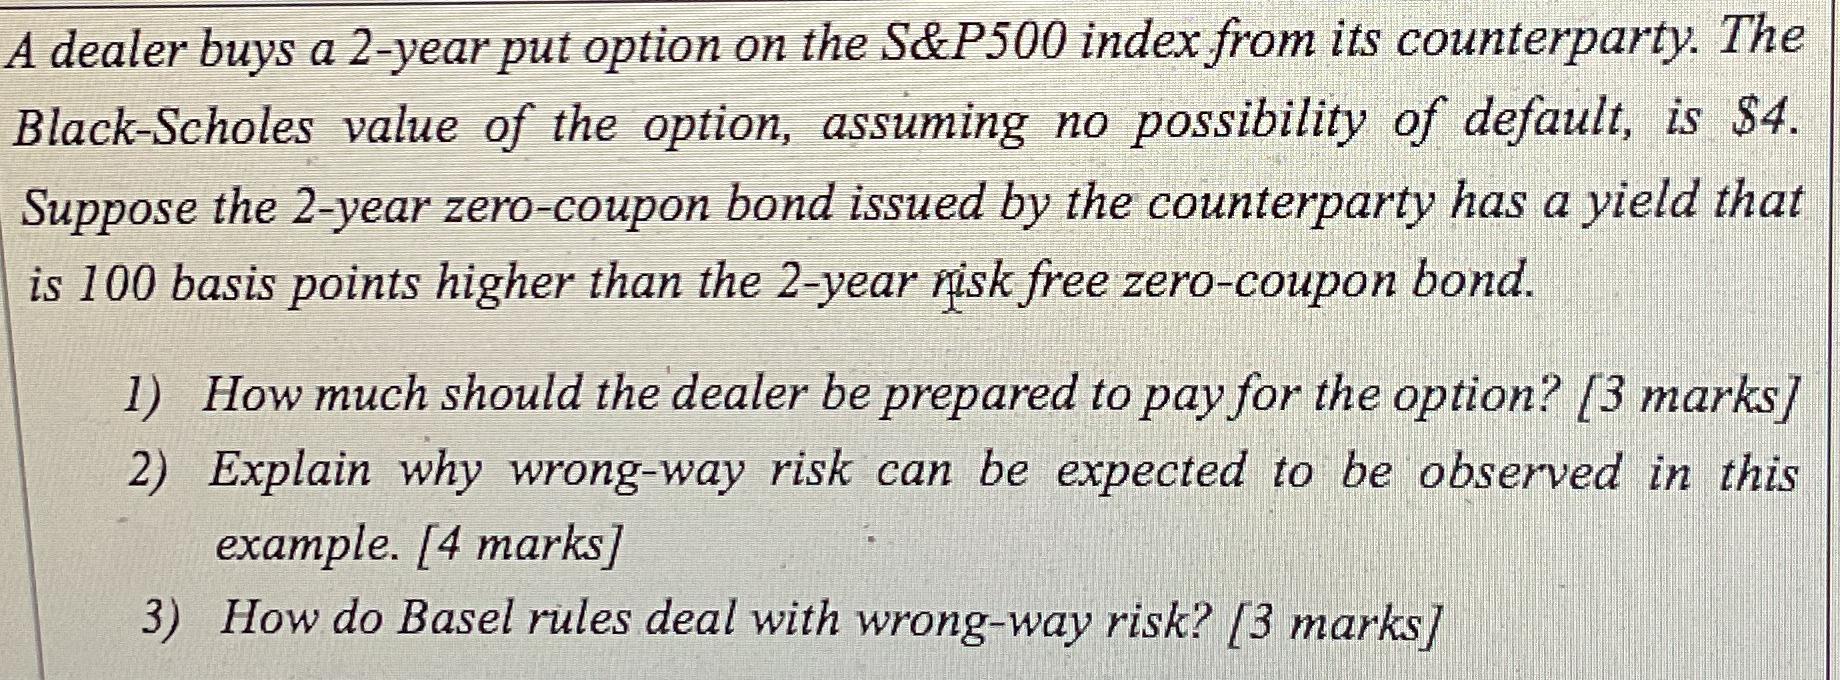 A dealer buys a 2-year put option on the S&P500 index from its counterparty. The Black-Scholes value of the